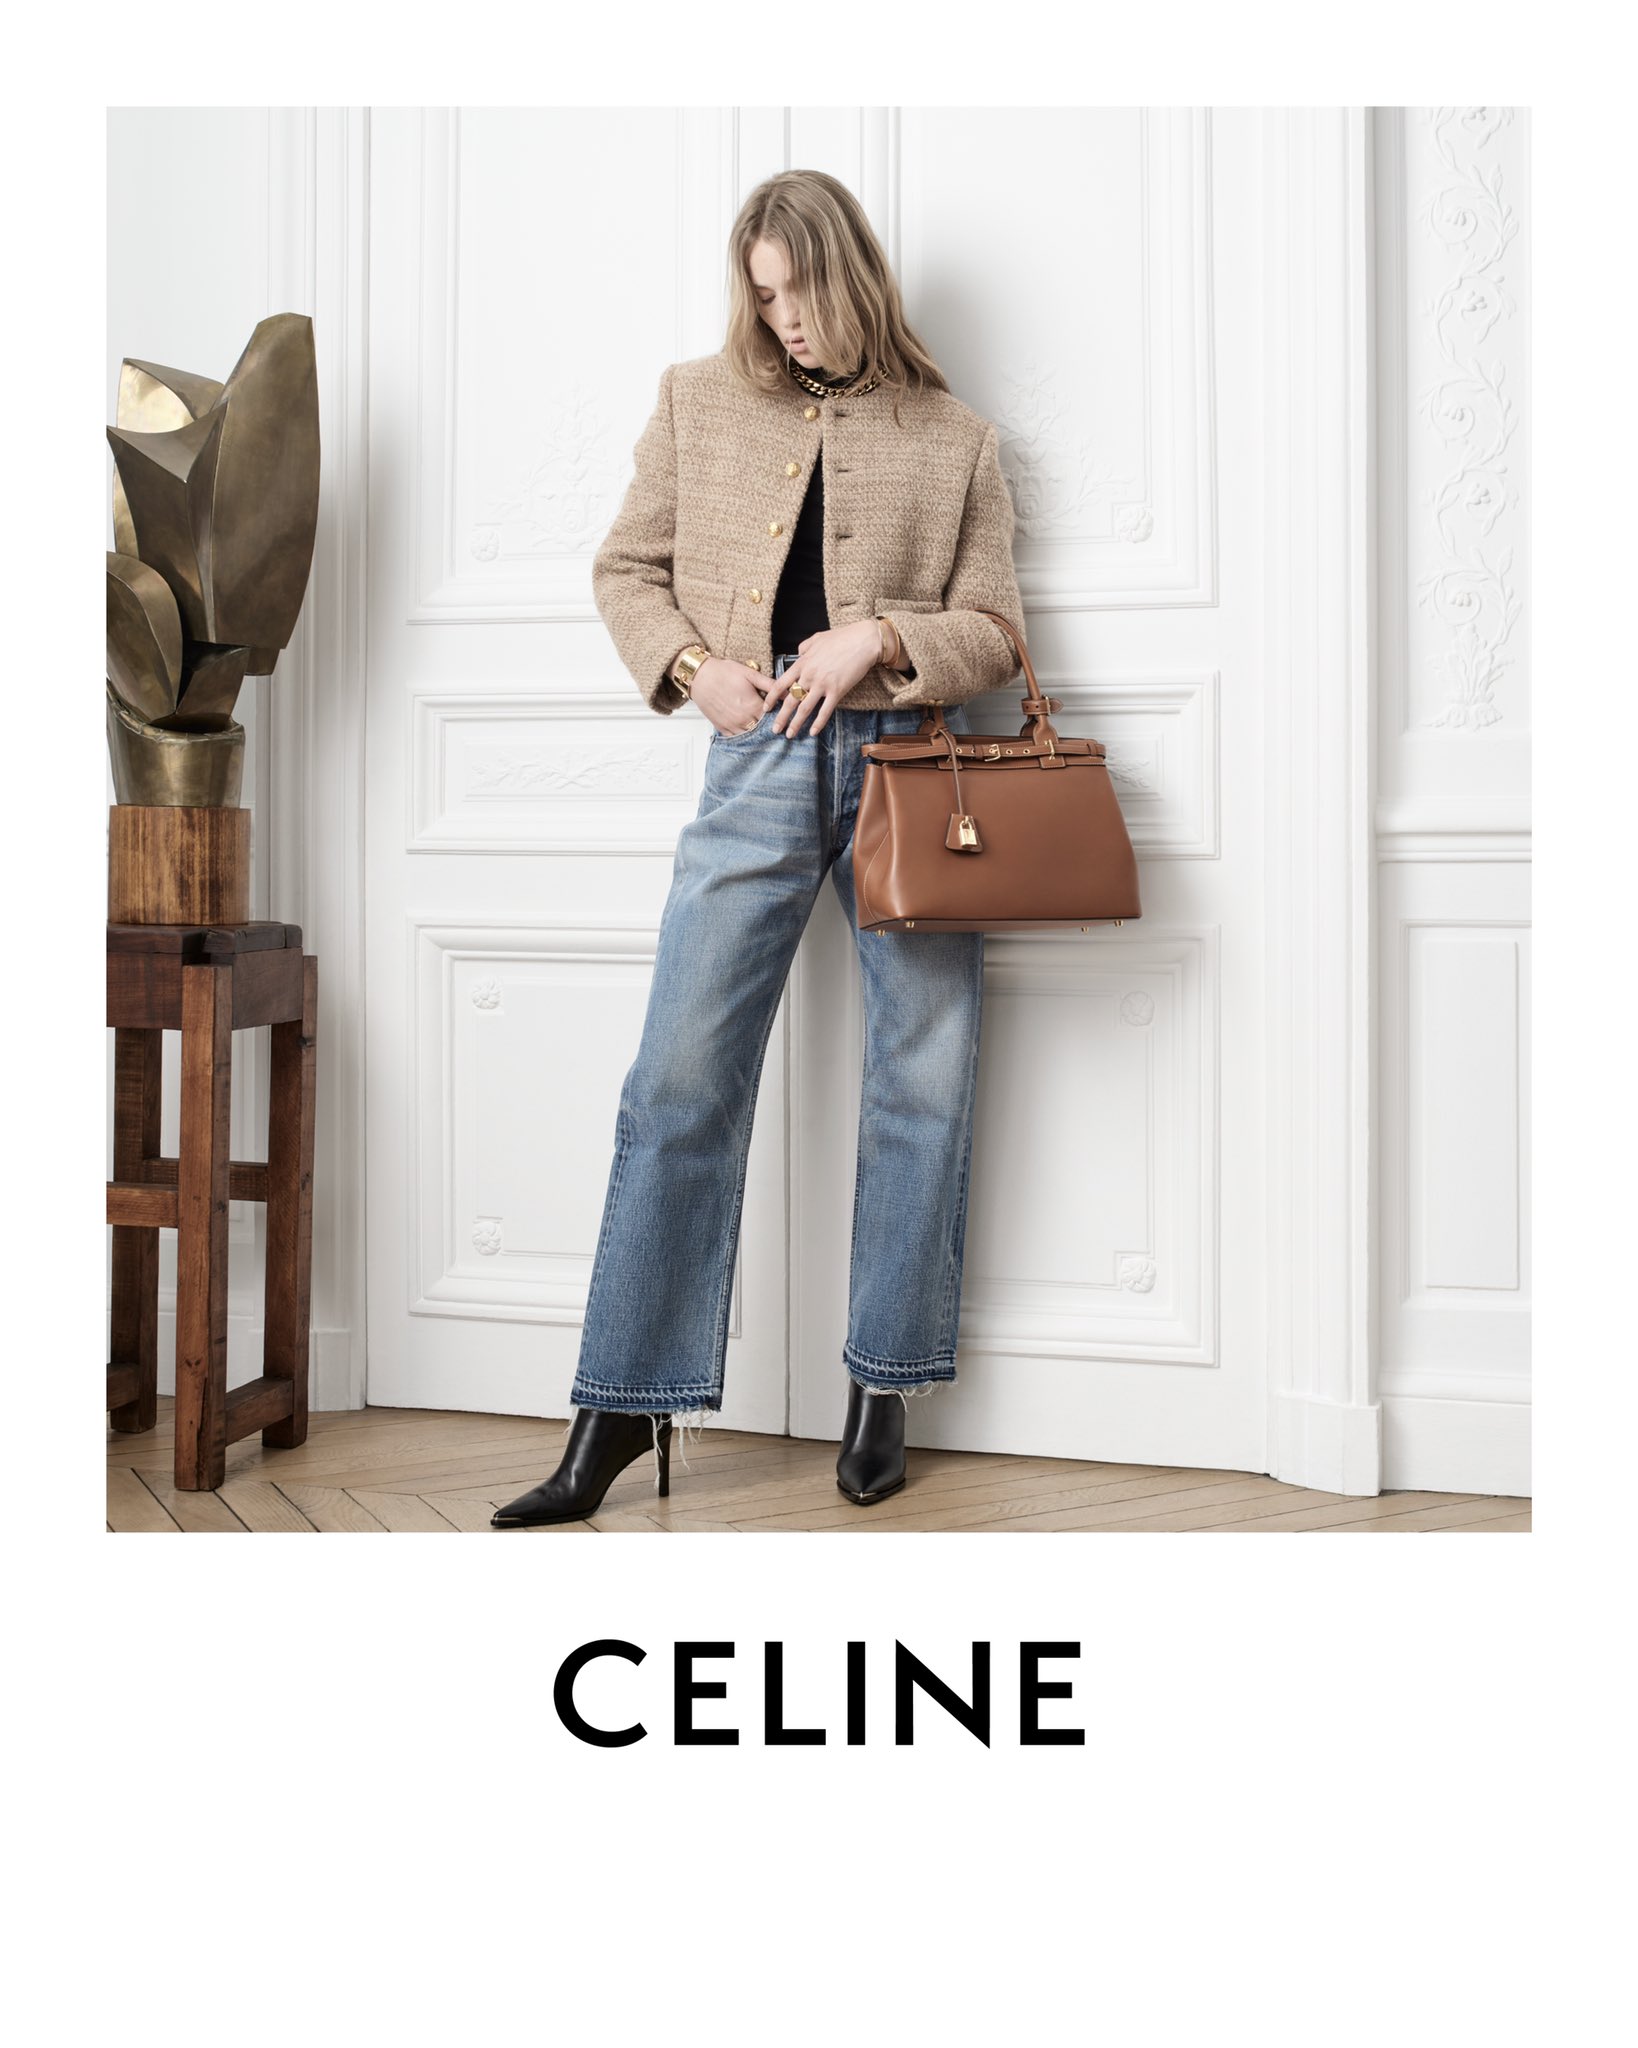 CELINE on X: CELINE WOMEN WINTER 22 DANS PARIS INTRODUCING THE NEW CELINE  BAG CELINE CONTI AN ENTIRELY NEW DESIGN, THE LUXURIOUS CELINE CONTI IS MADE  IN THE HIGHEST TRADITION OF OUR